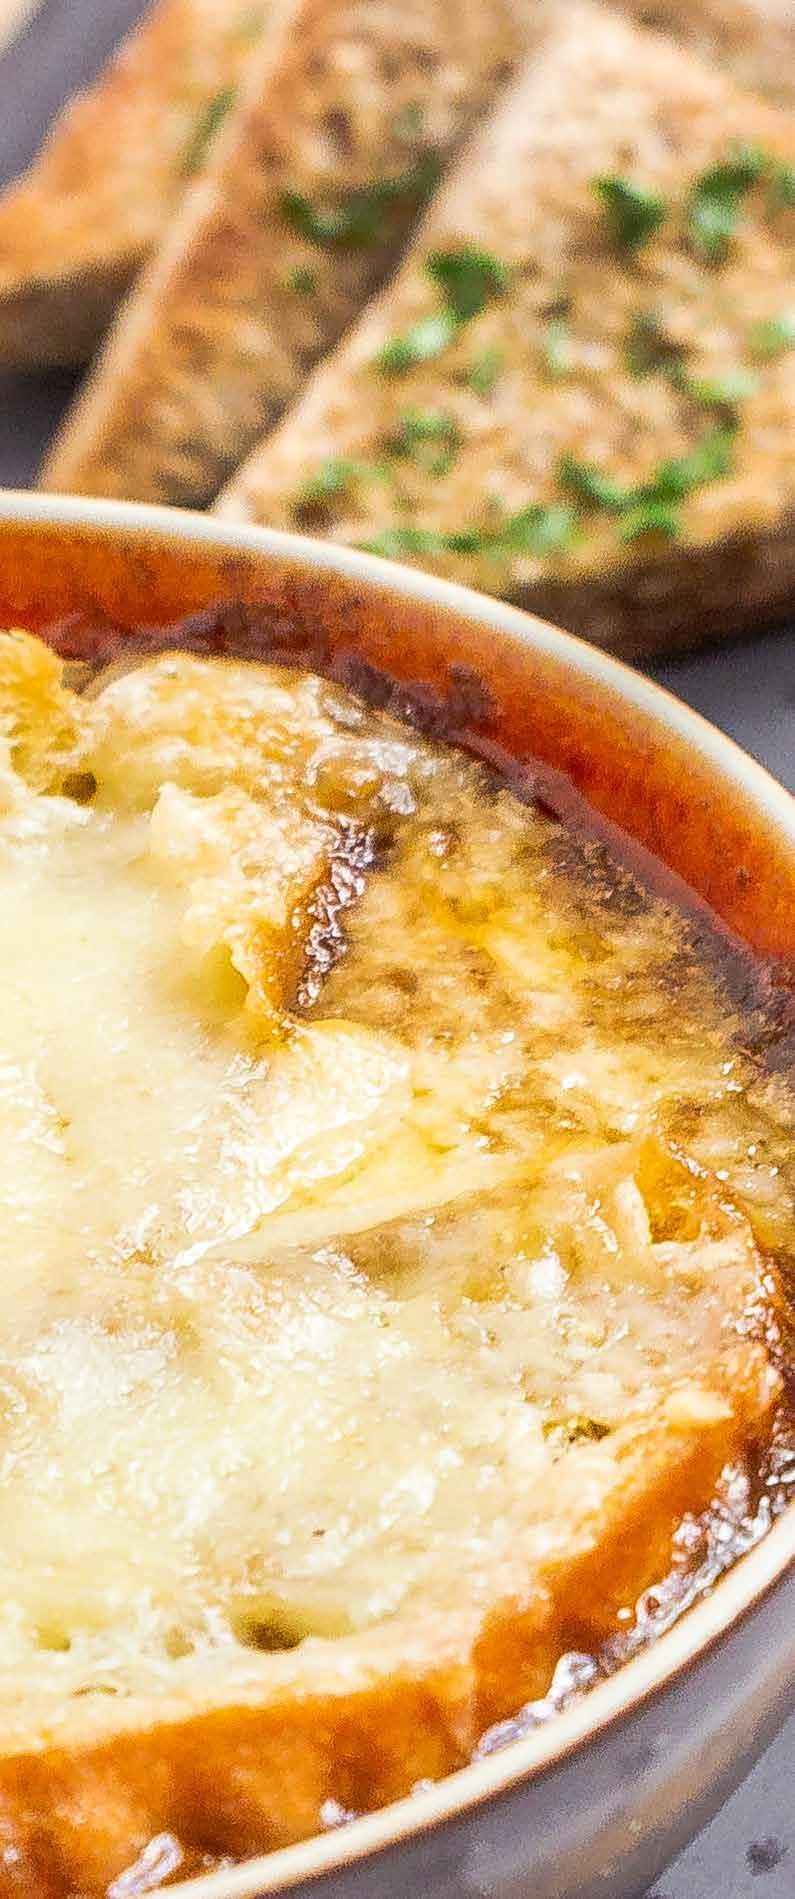 French Onion Soup 25